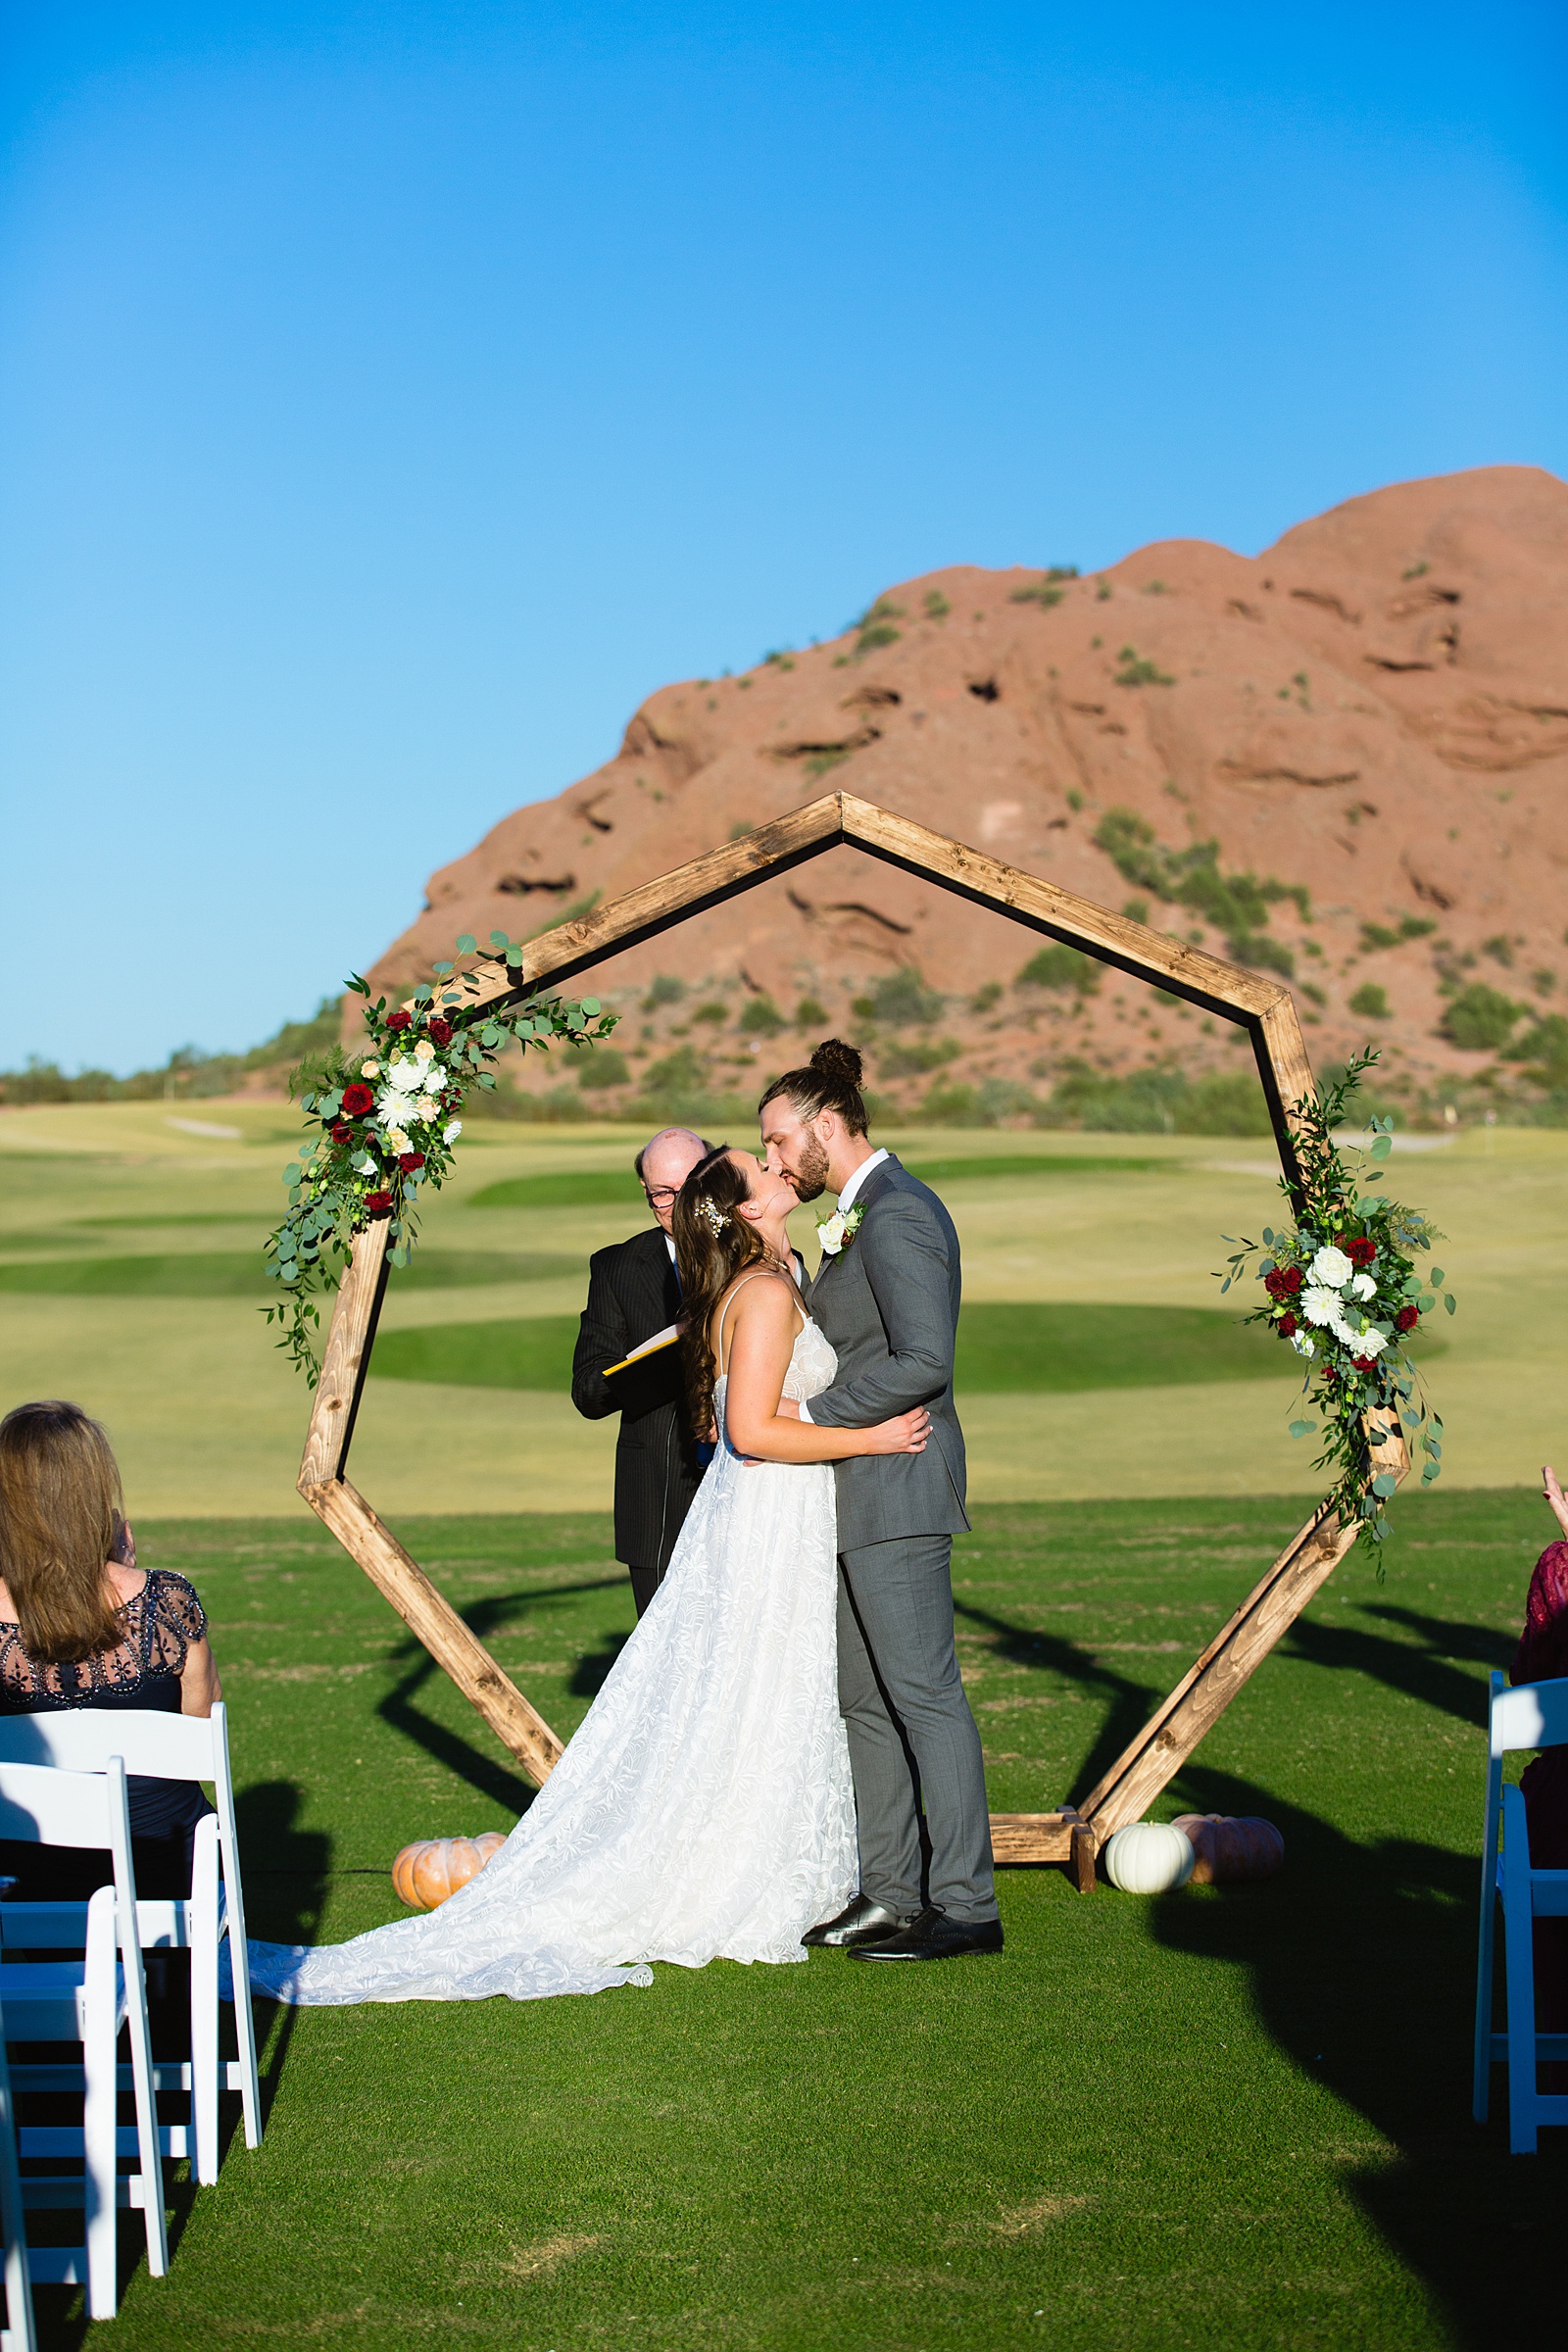 Bride and groom share their first kiss during their wedding ceremony at Papago Events by Arizona wedding photographer PMA Photography.